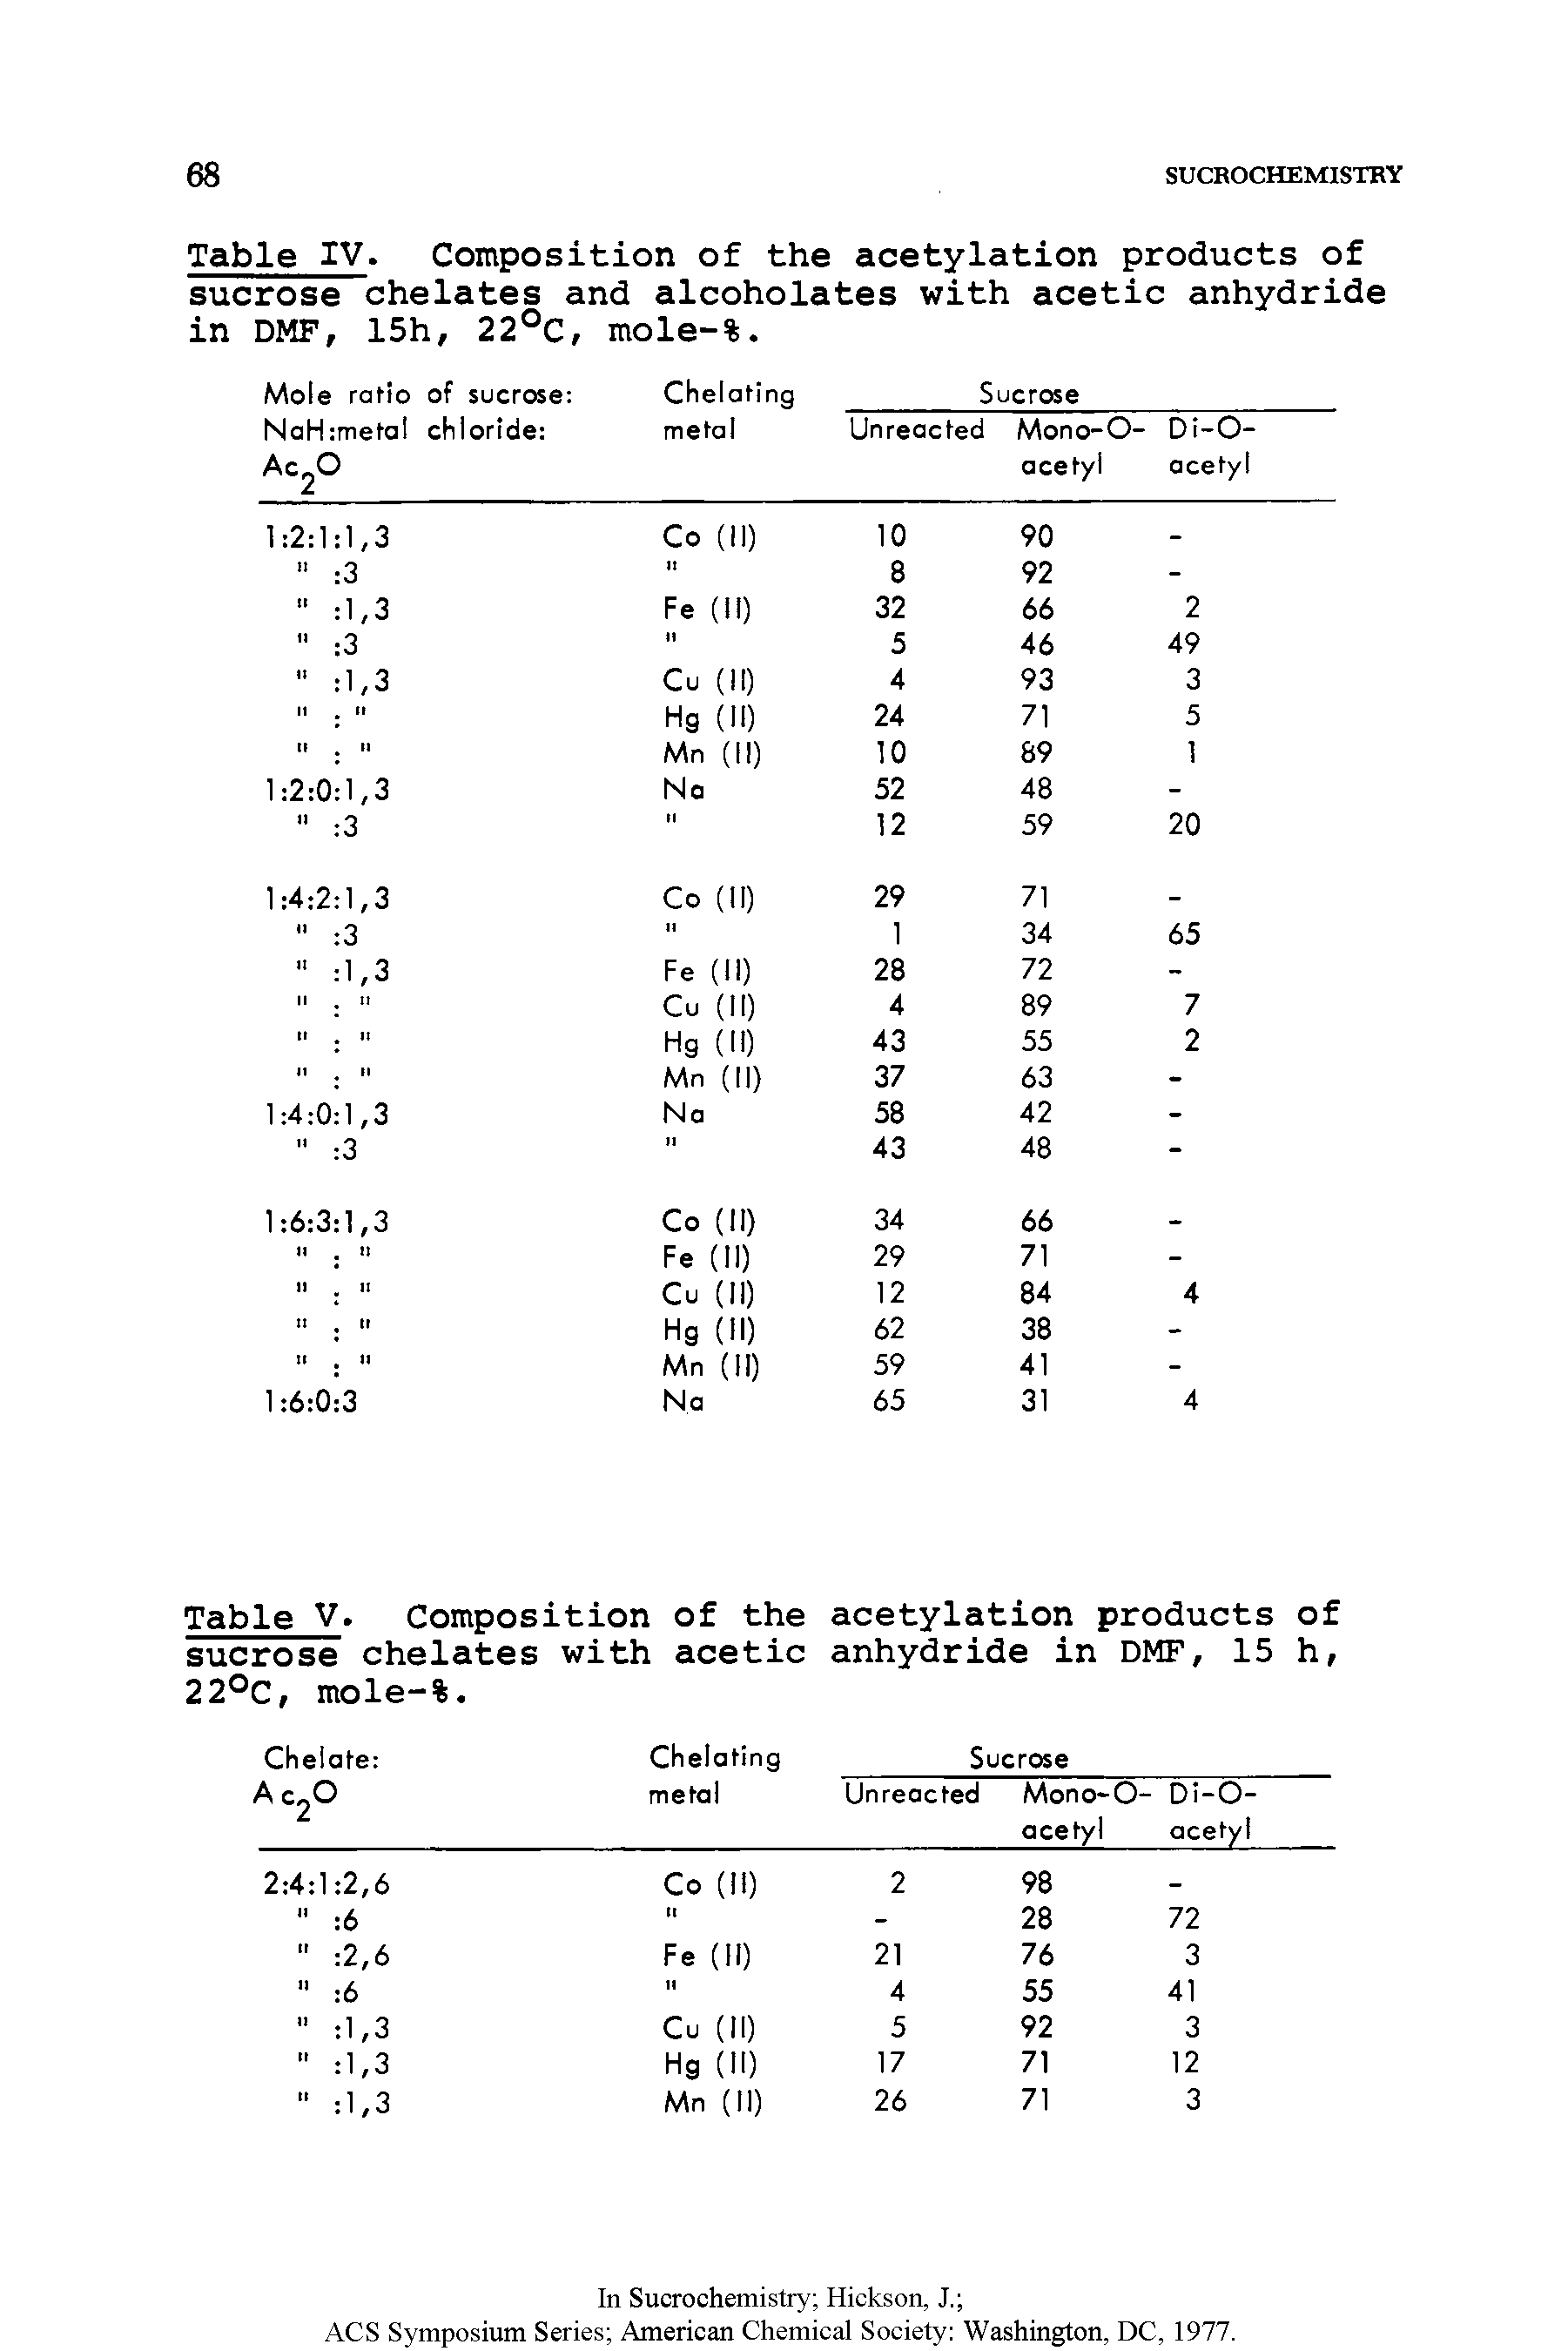 Table IV Composition of the acetylation products of sucrose chelates and alcoholates with acetic anhydride in DMF, 15h, 22°C, mole-%.